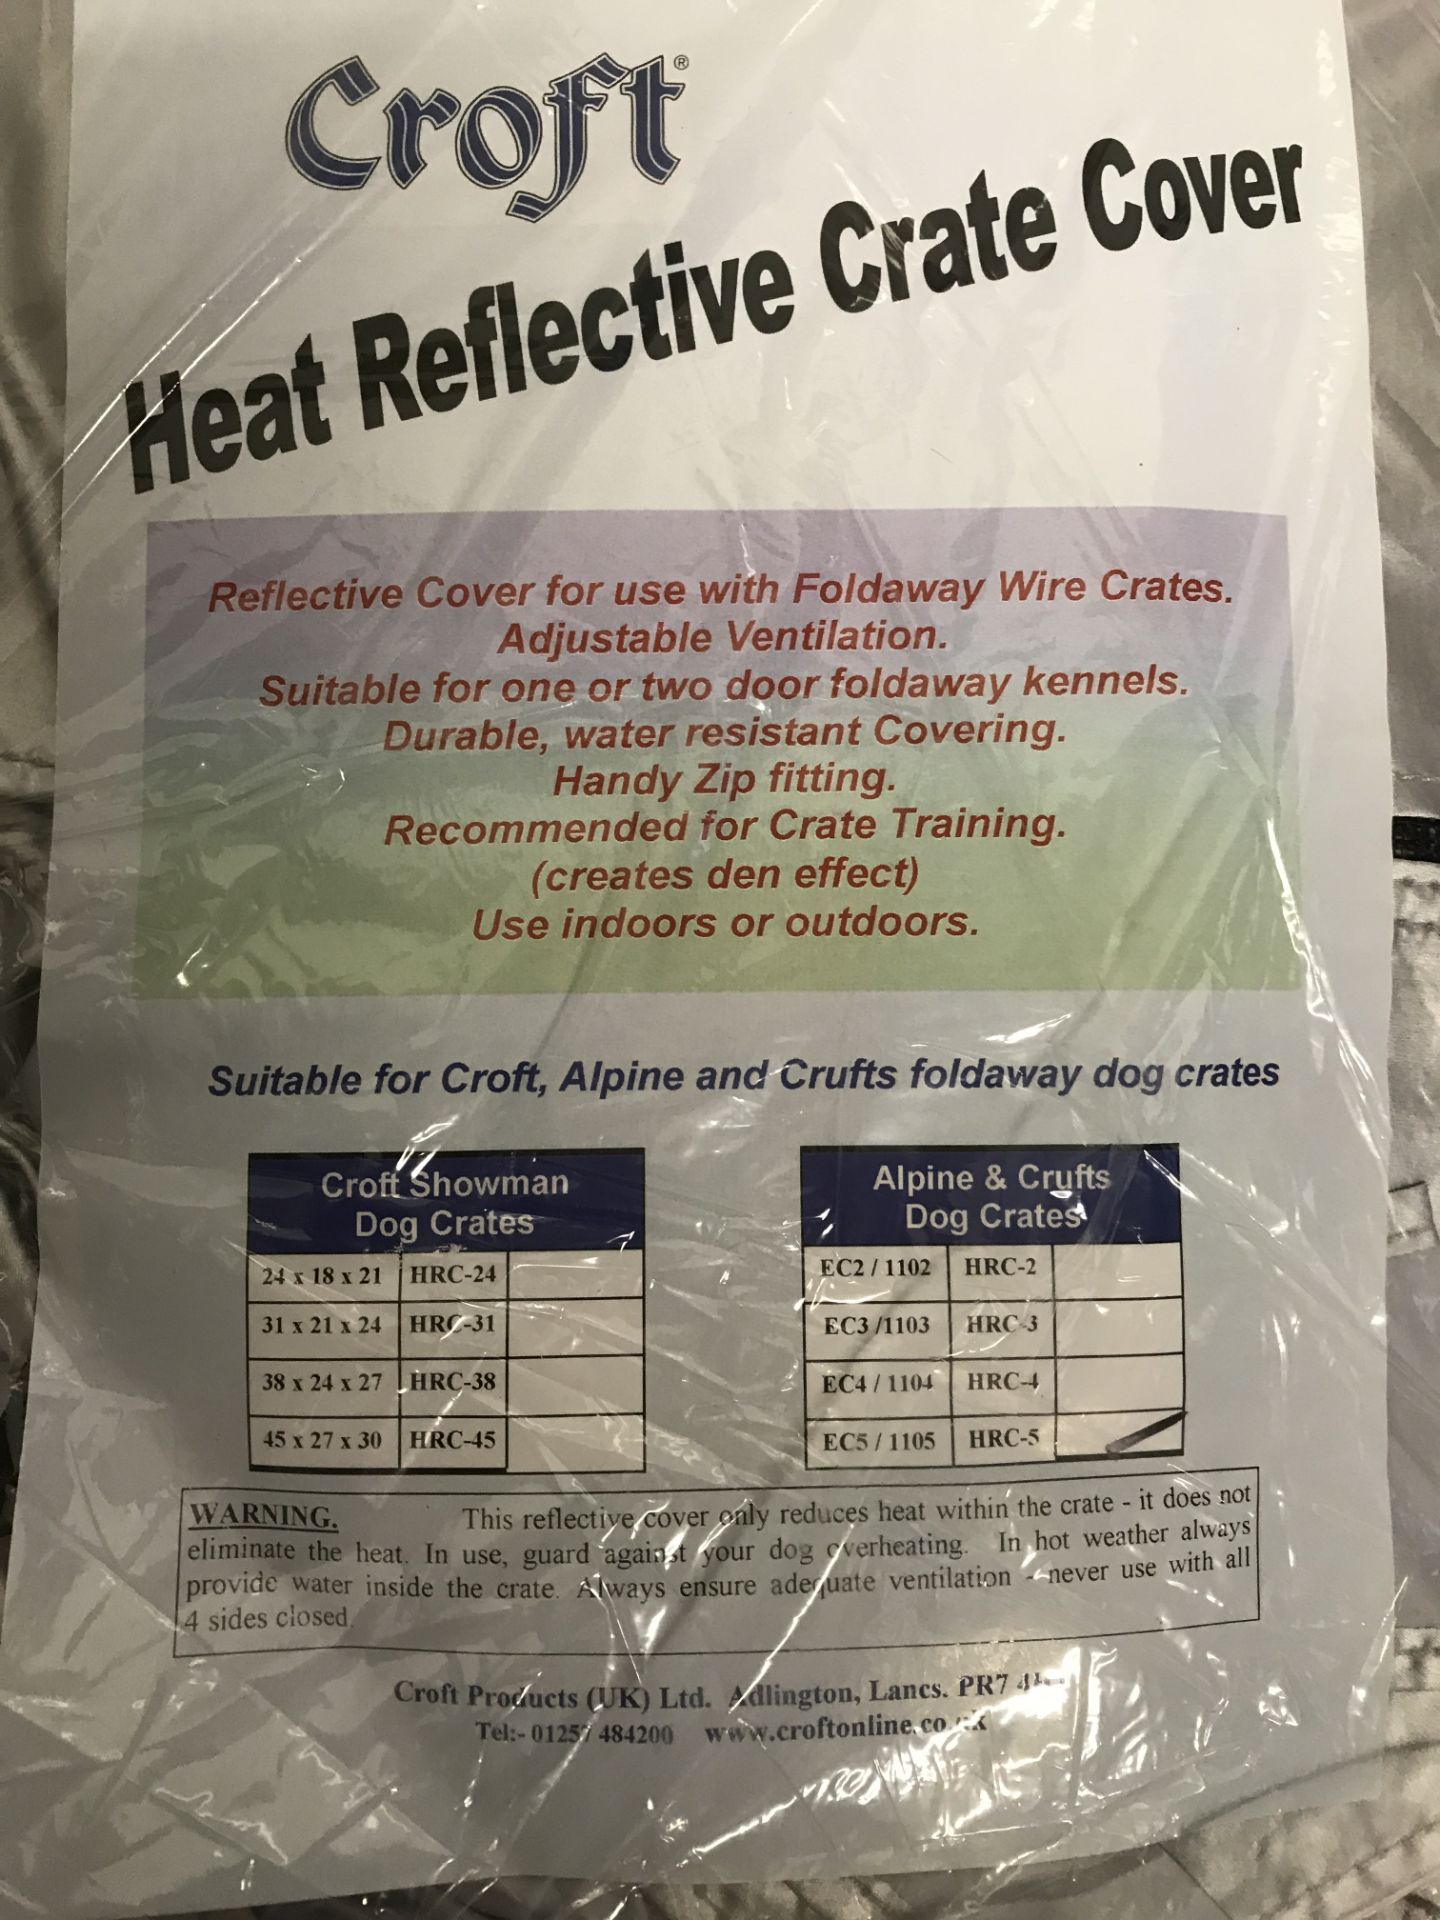 5 x Croft Heat Reflective Crate Covers - Image 2 of 2